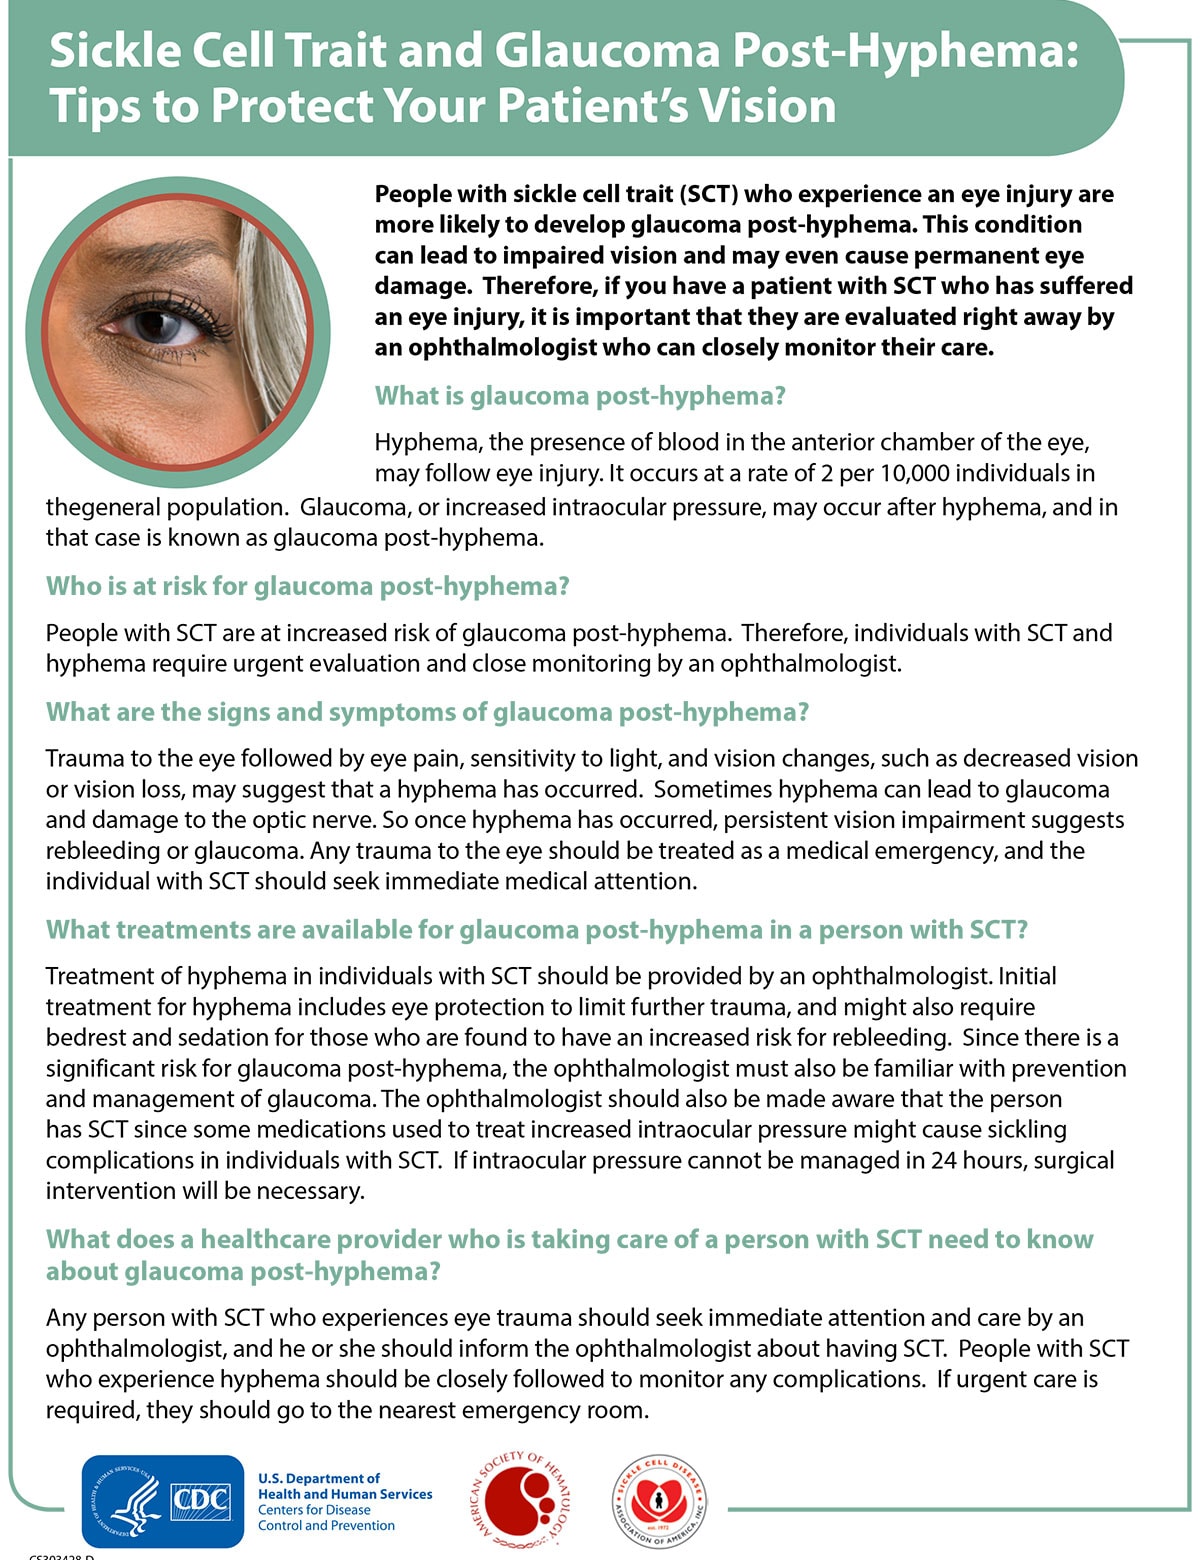 Sickle Cell Trait and Glaucoma Post-Hyphema: Tips to Protect Your Patient’s Vision - Factsheet thumbnail